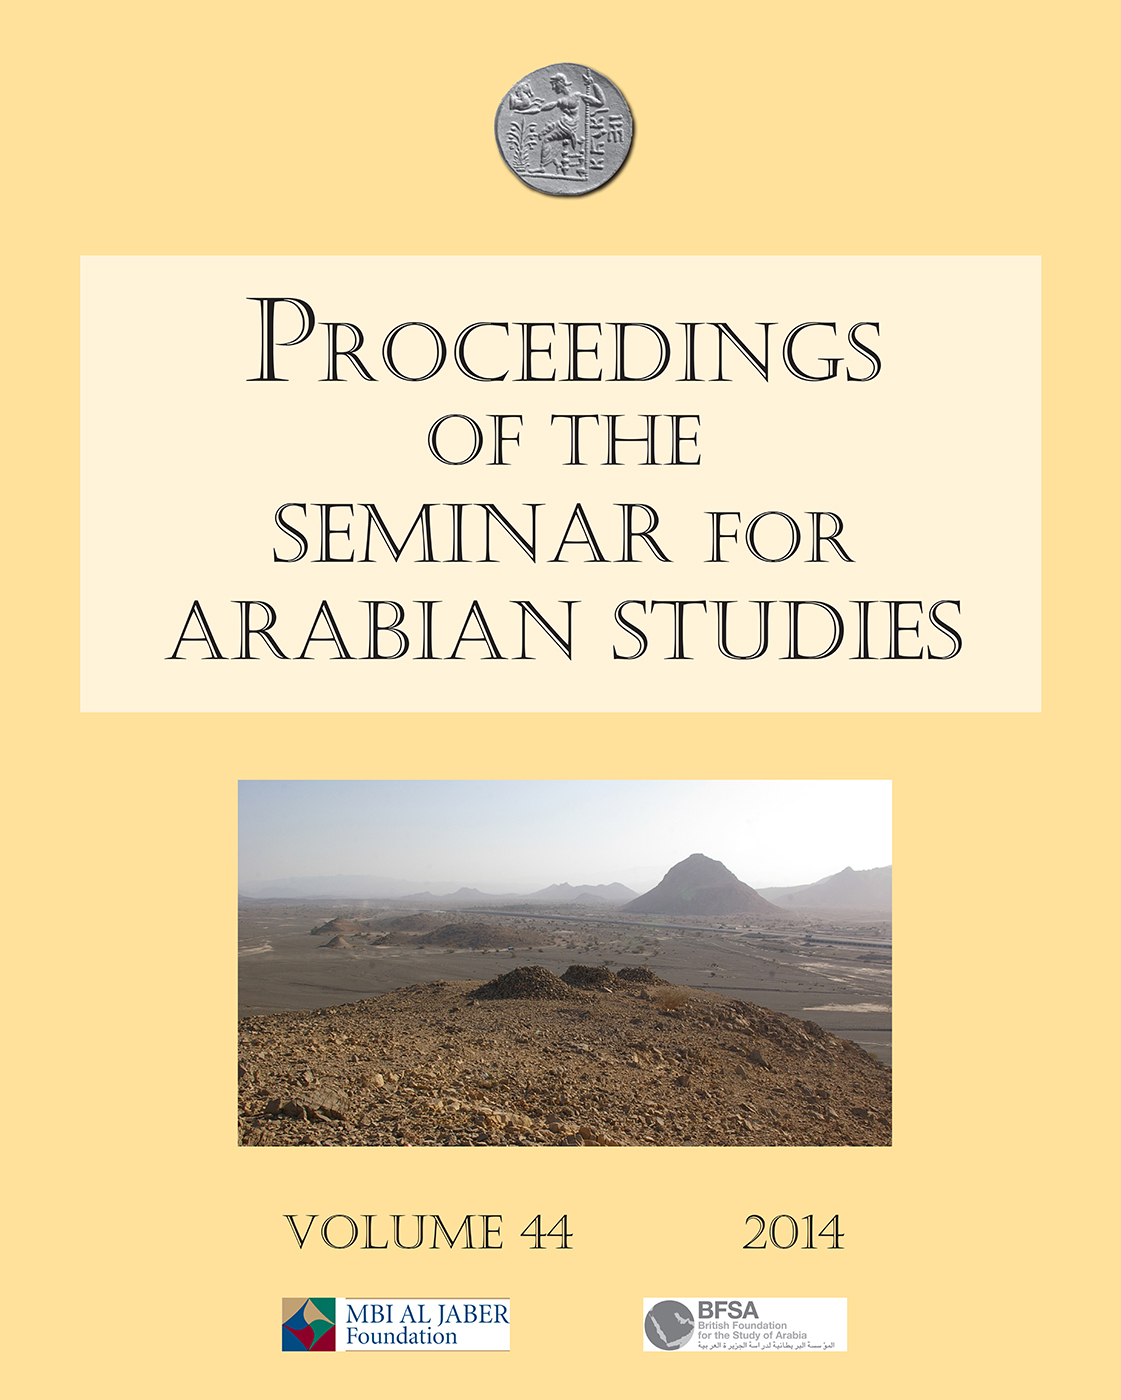 					View Vol. 44 (2014): Proceedings of the Seminar for Arabian Studies Volume 44 2014: Papers from the forty-seventh meeting of the Seminar for Arabian Studies held at the British Museum, London, 26 to 28 July 2013 
				